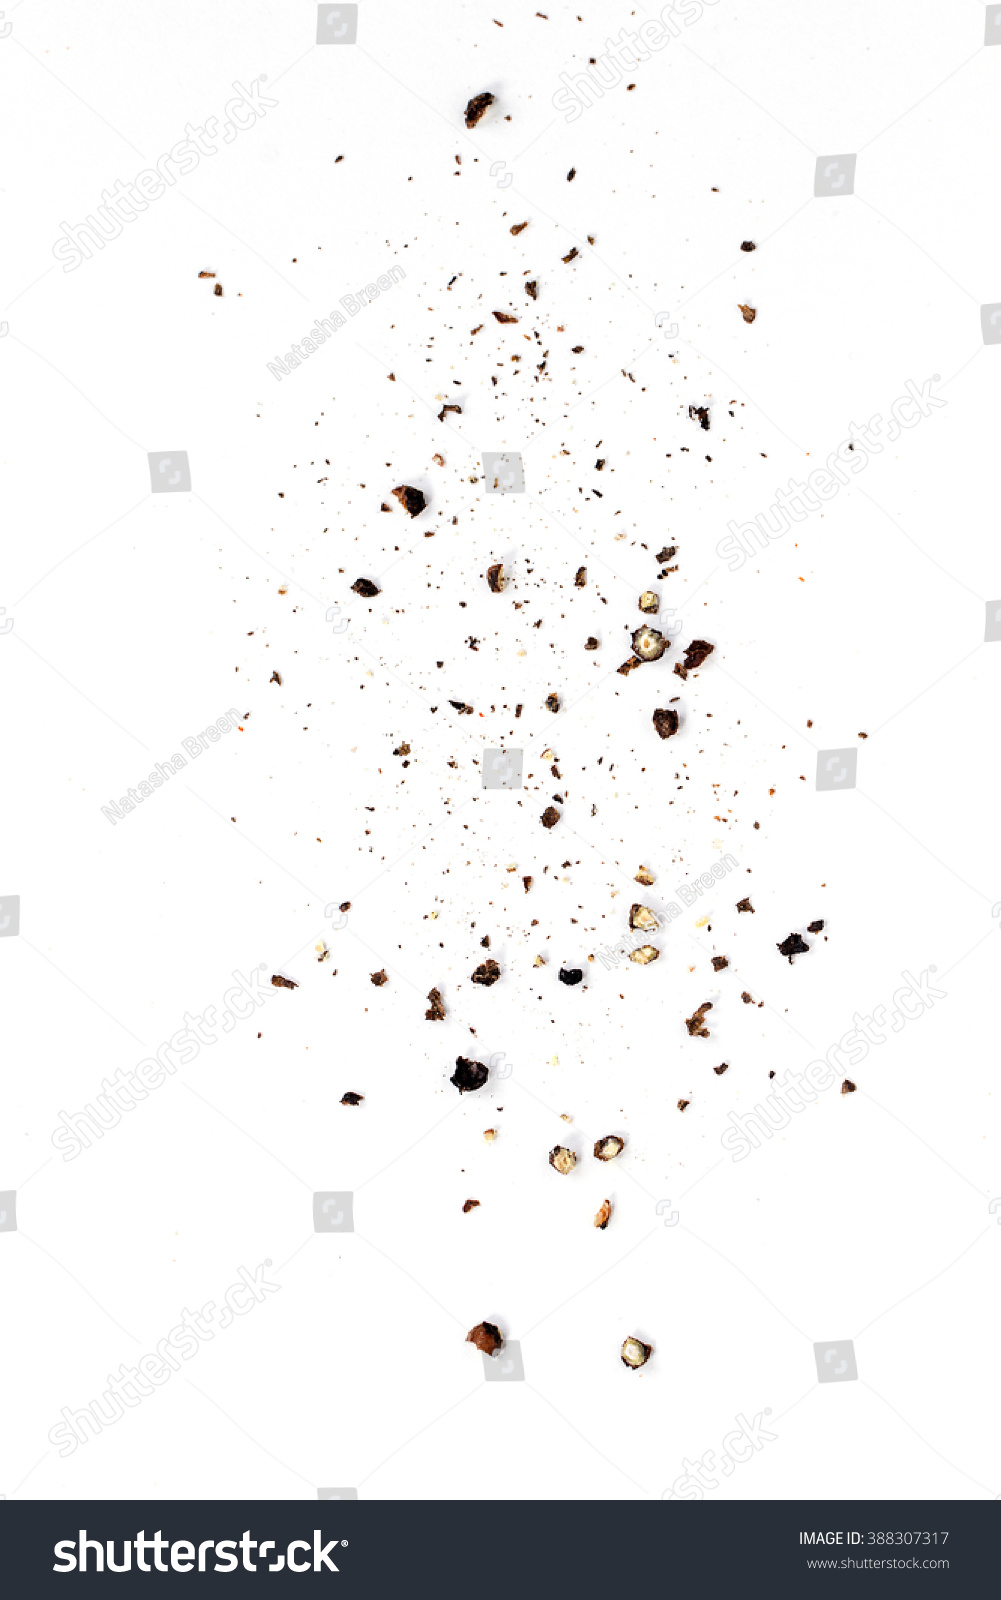 Sifting heavy ground black pepper over white background. #388307317